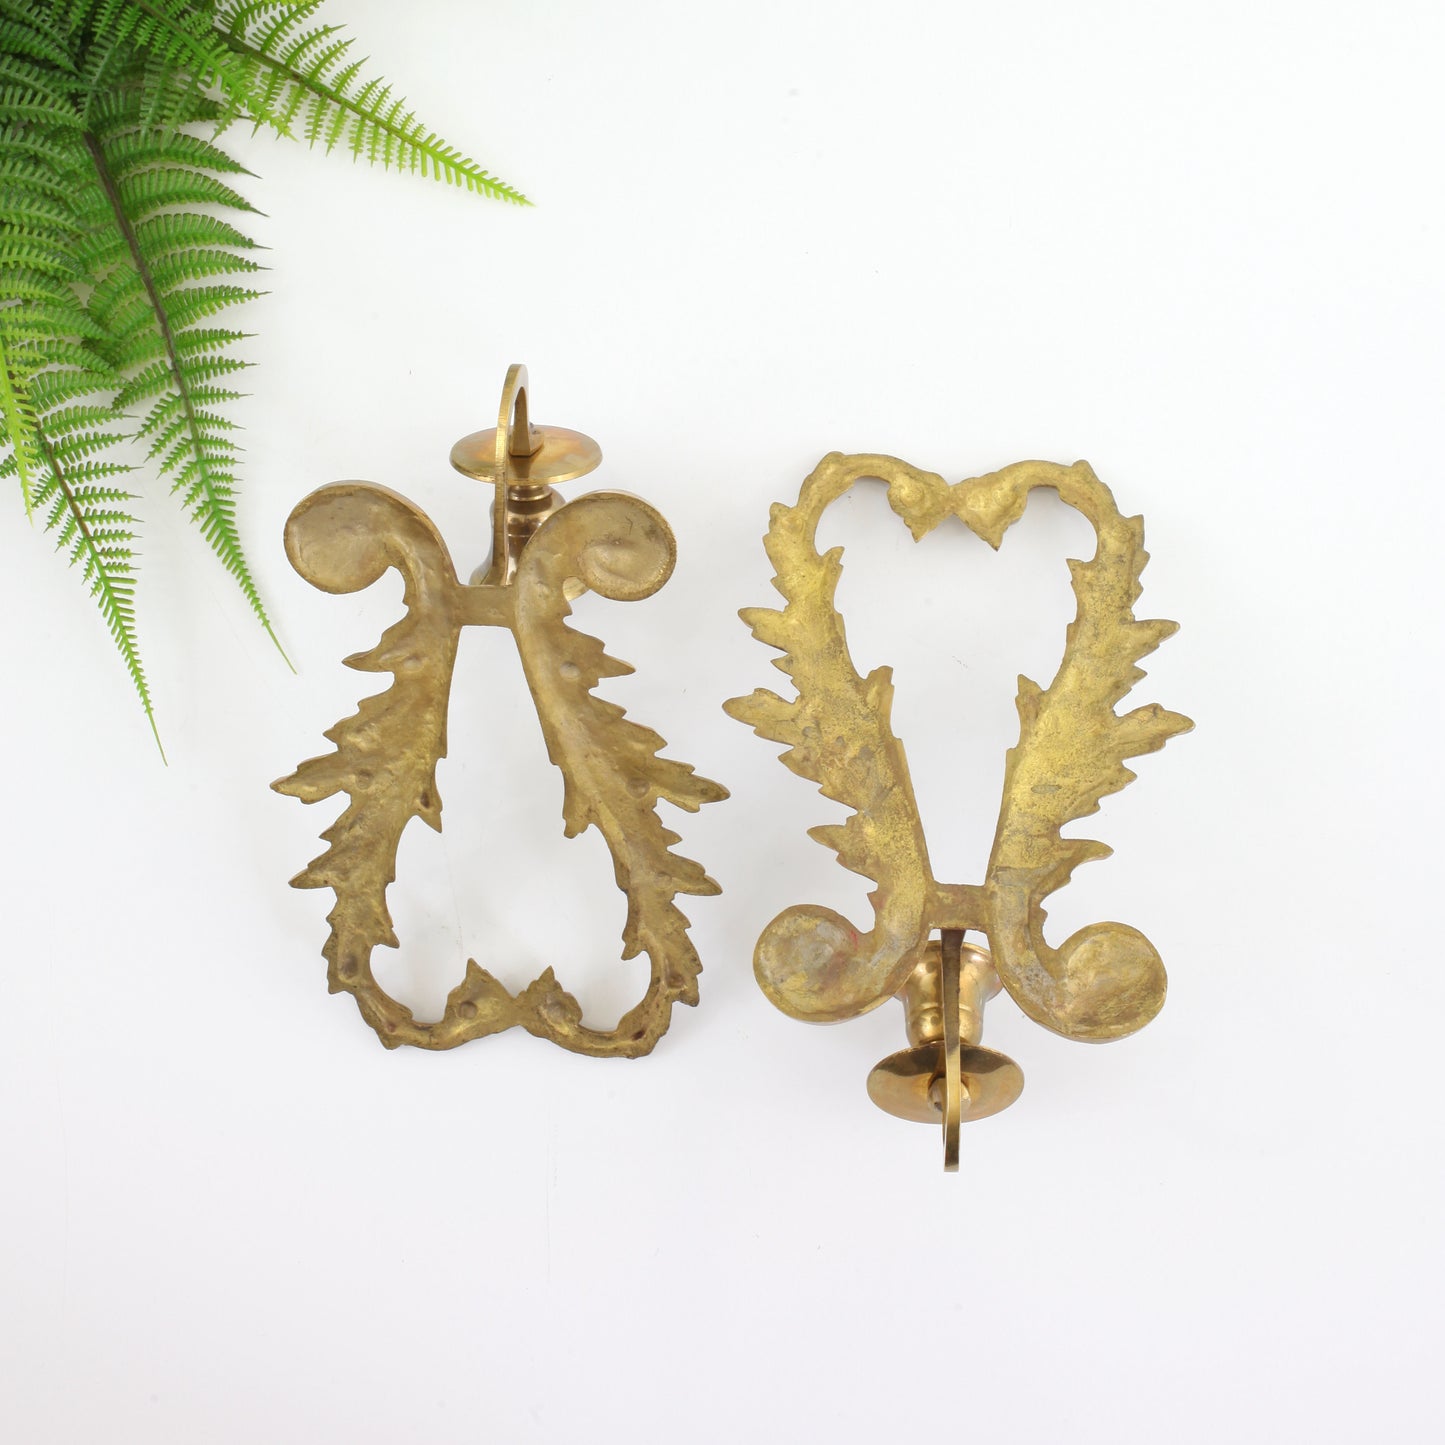 SOLD - Vintage Art Nouveau Brass Wall Sconce Candle Holders